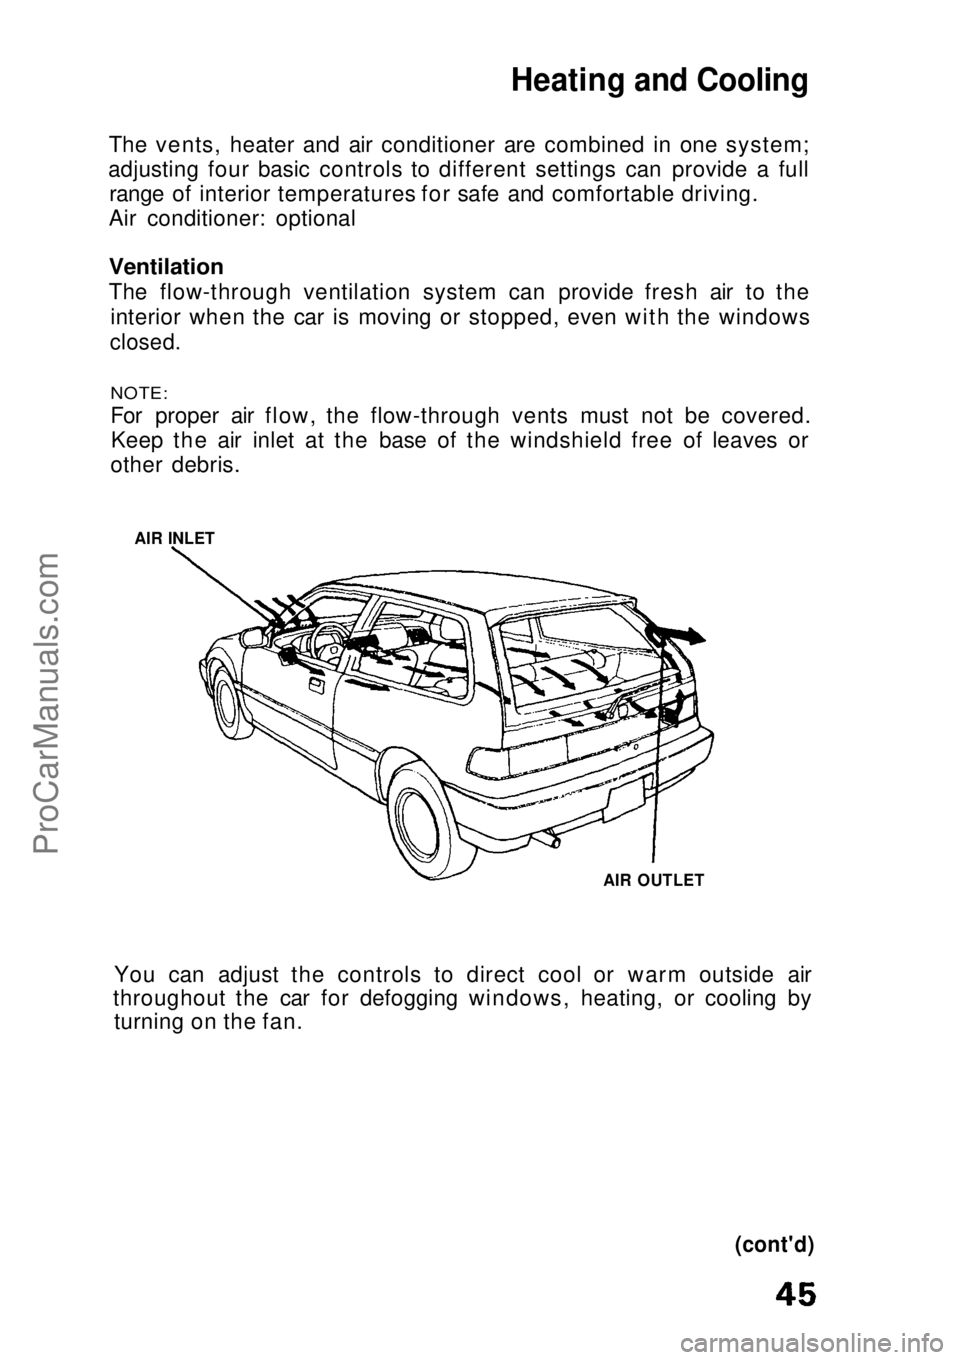 HONDA CIVIC 1991  Owners Manual 
Heating and Cooling

The vents, heater and air conditioner are combined in one system;
adjusting four basic controls to different settings can provide a full range of interior temperatures for safe a